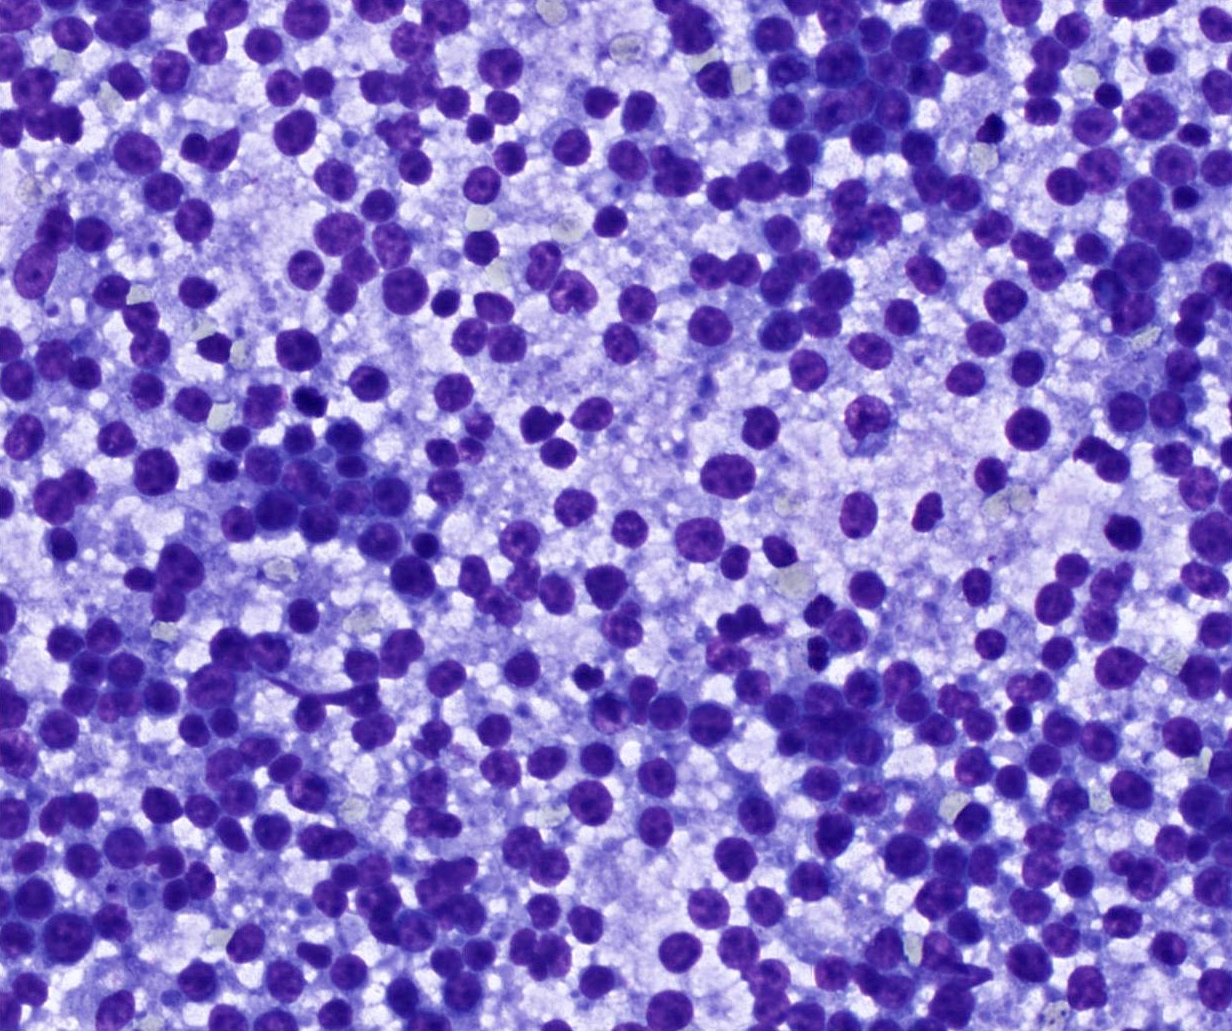 Suspicious for large cell lymphoma